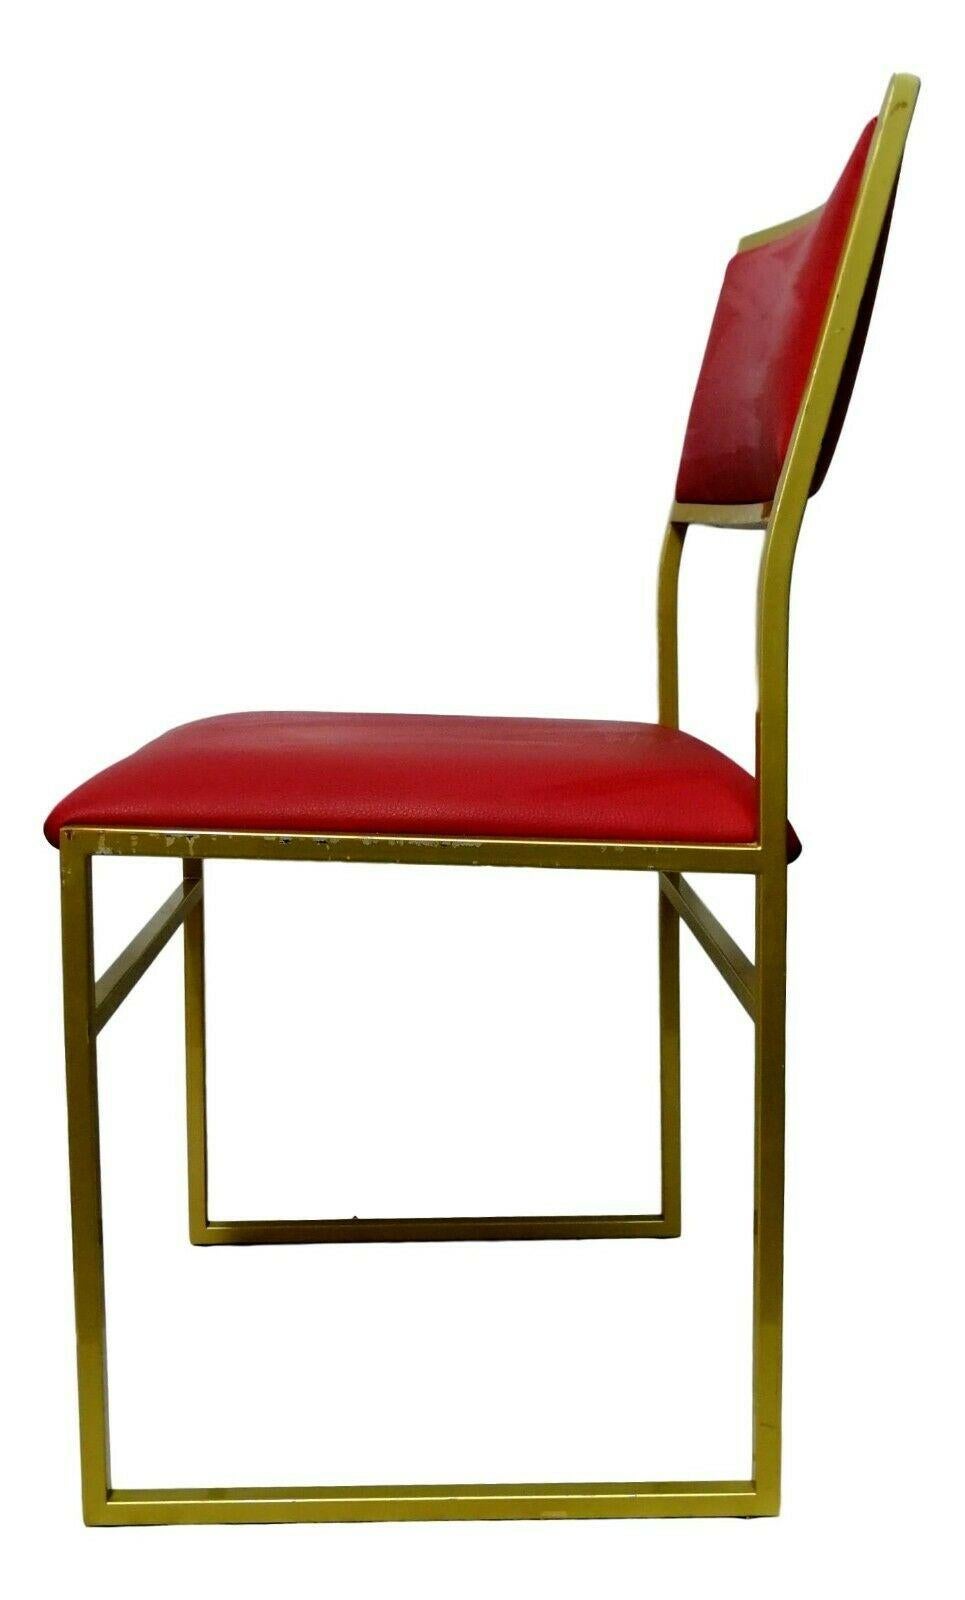 Late 20th Century Collectible Chair in Gold Metal and Burgundy Upholstery, 1970s For Sale